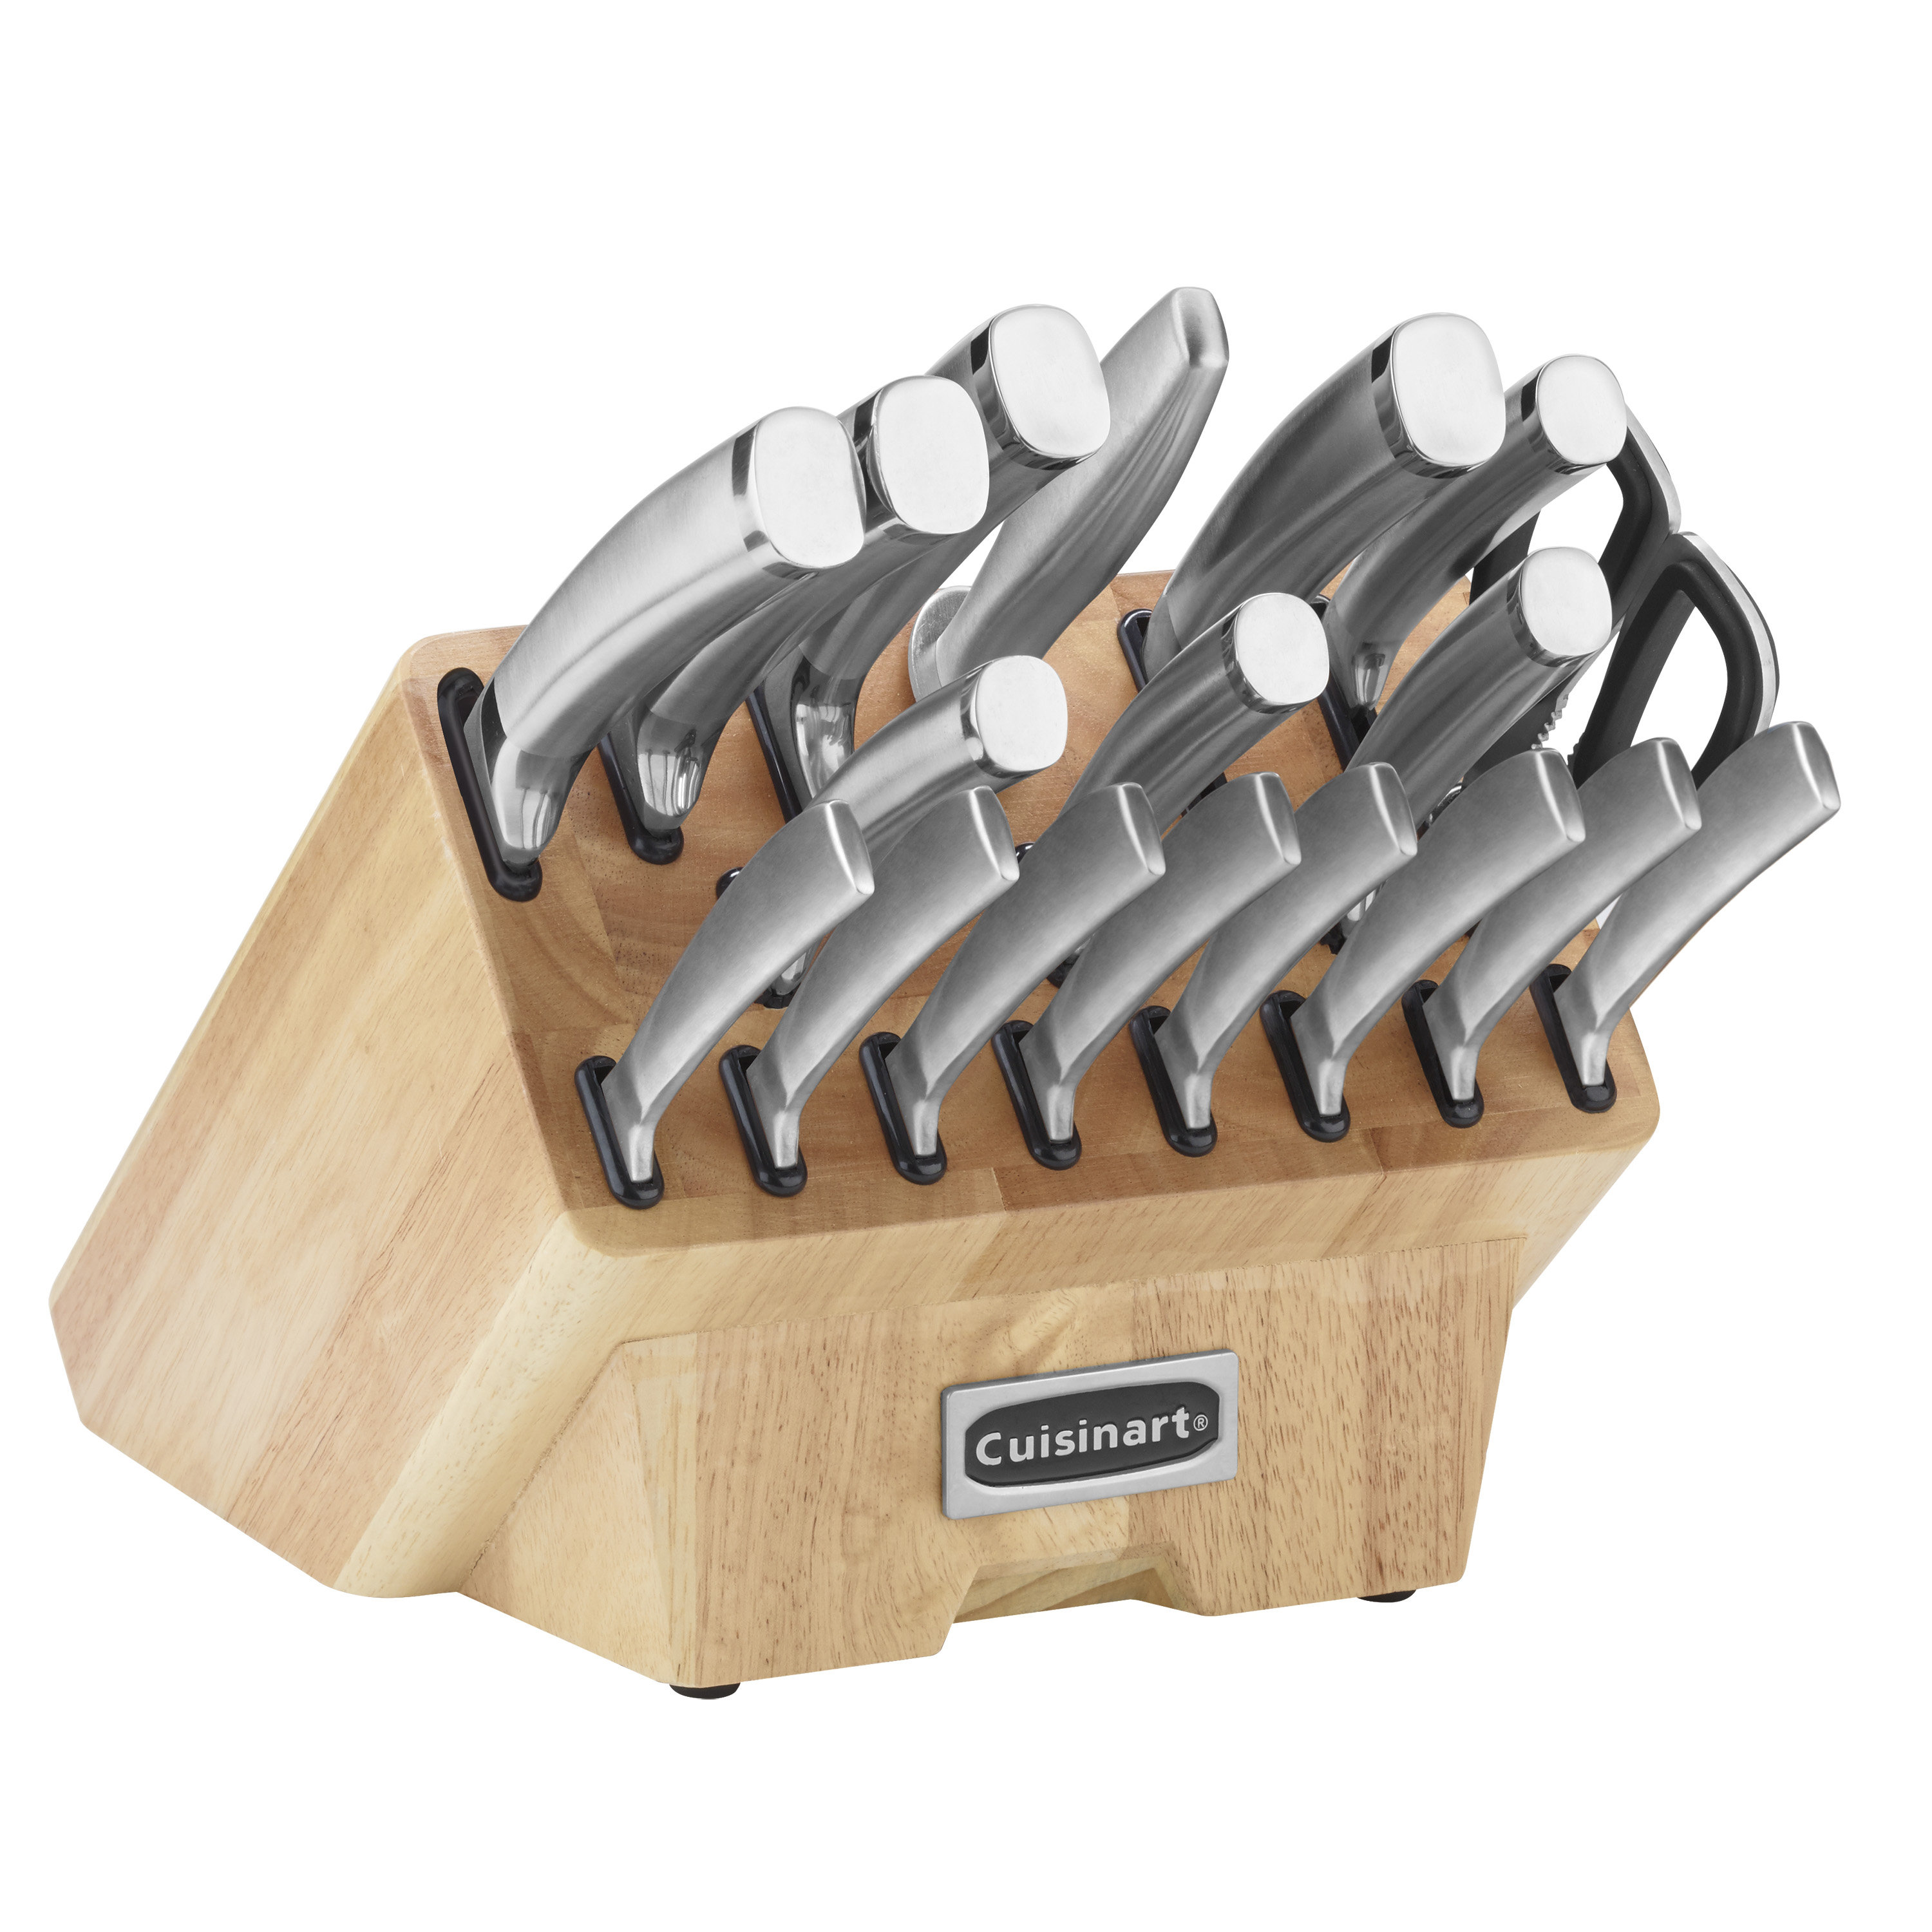 Save 50% on the Cuisinart knife block set that over 10,000  shoppers  agree is the best